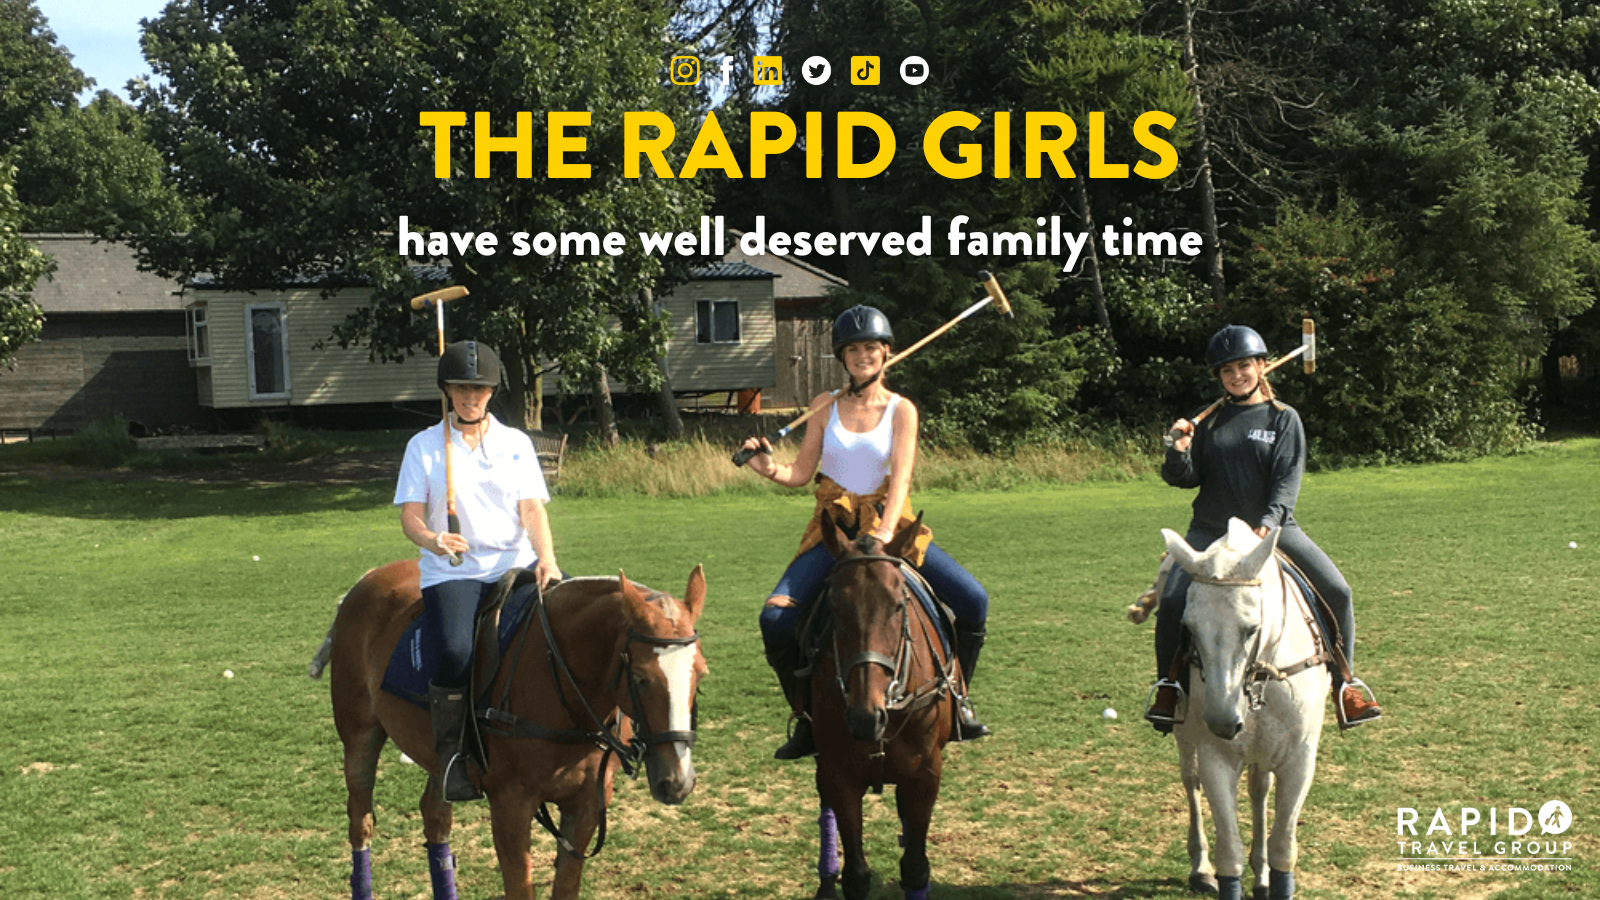 The Rapid girls have some well deserved family time